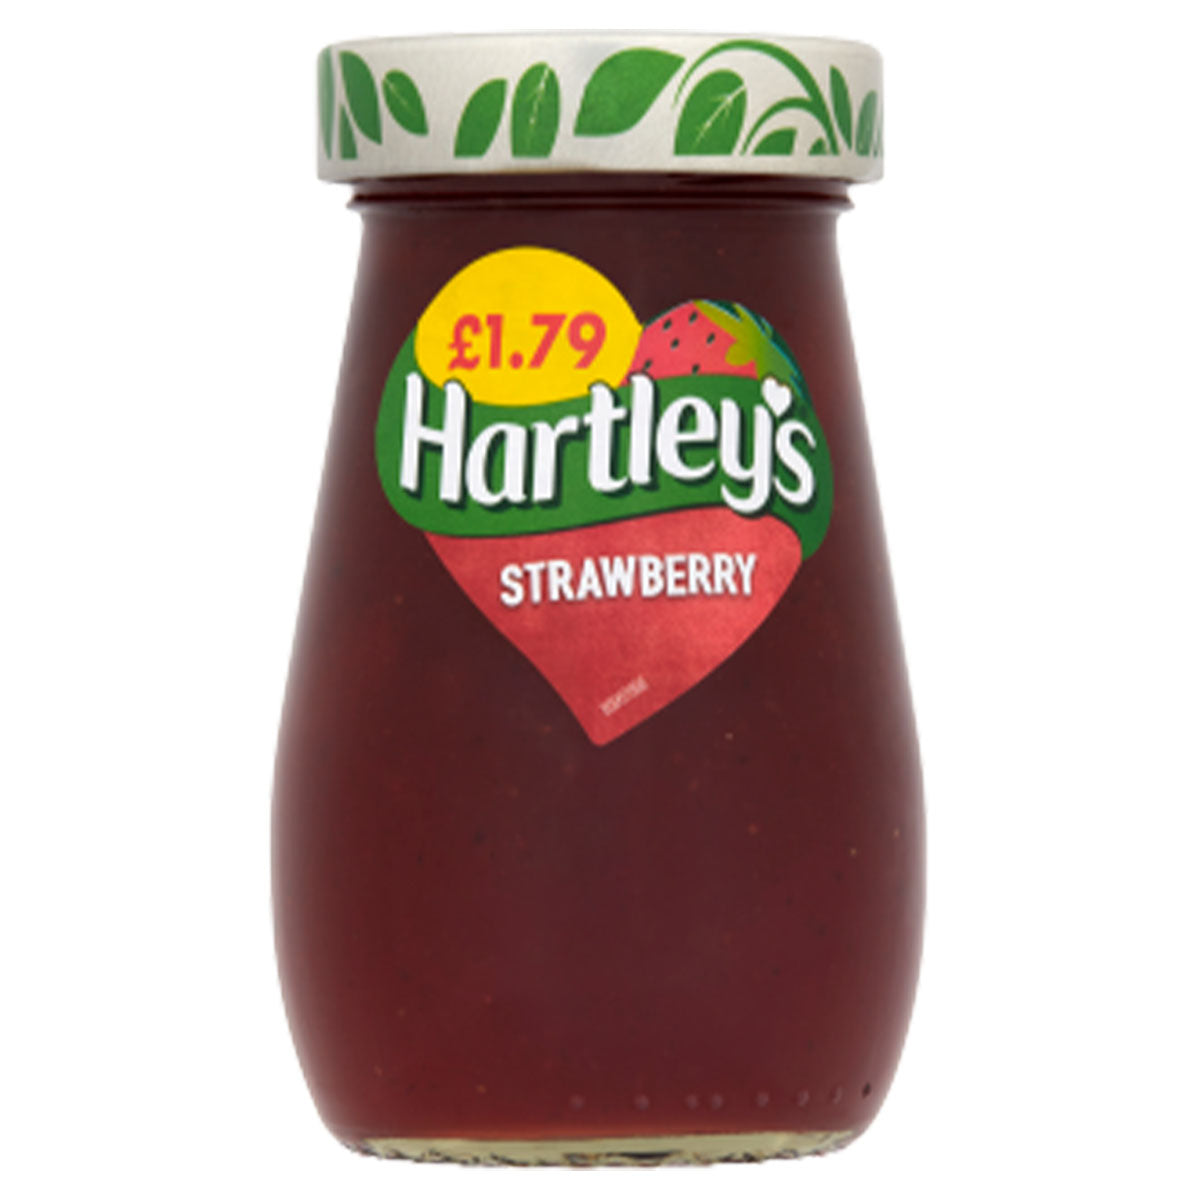 Hartleys - Strawberry Jam - 340g - Continental Food Store